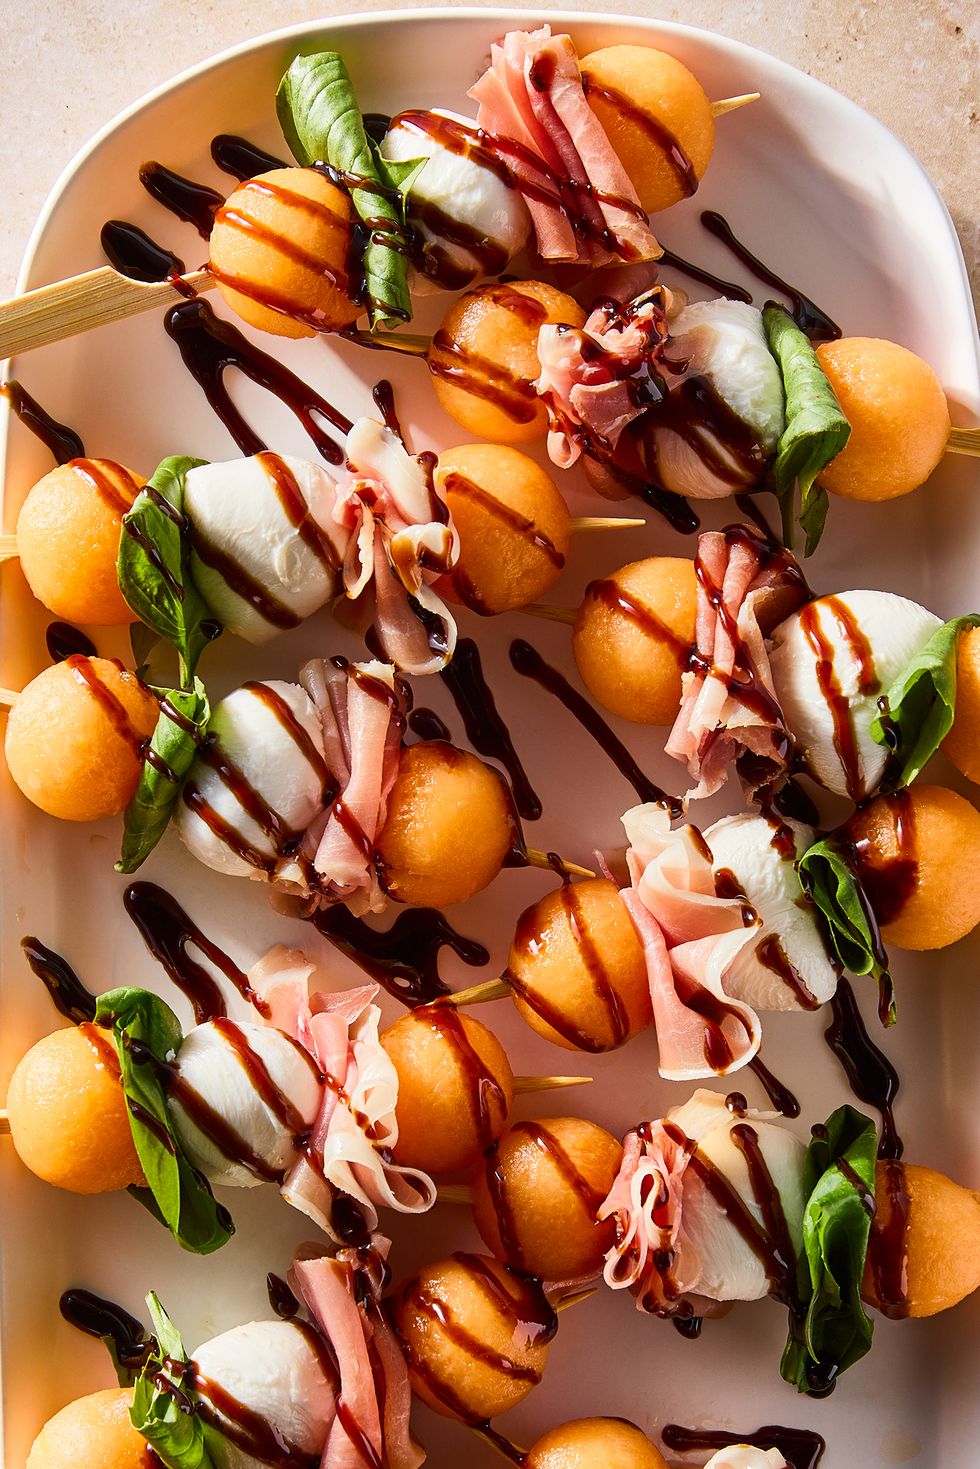 skewers with cantaloupe balls, mozzarella balls, and fresh basil leaves drizzled with balsamic glaze